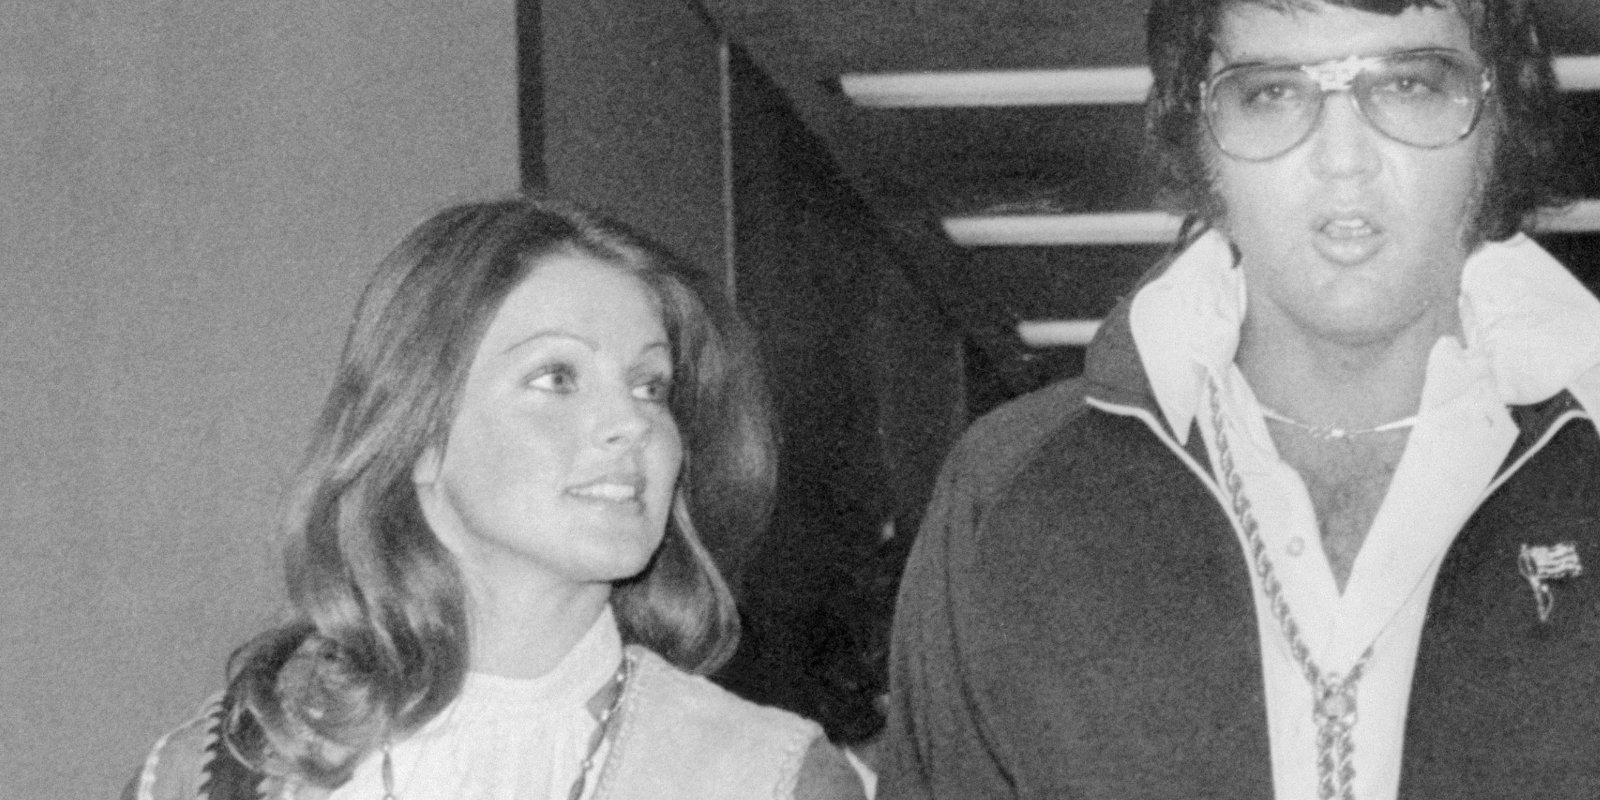 Priscilla Presley and Elvis Presley pose as they leave the courthouse following their divorce hearing.